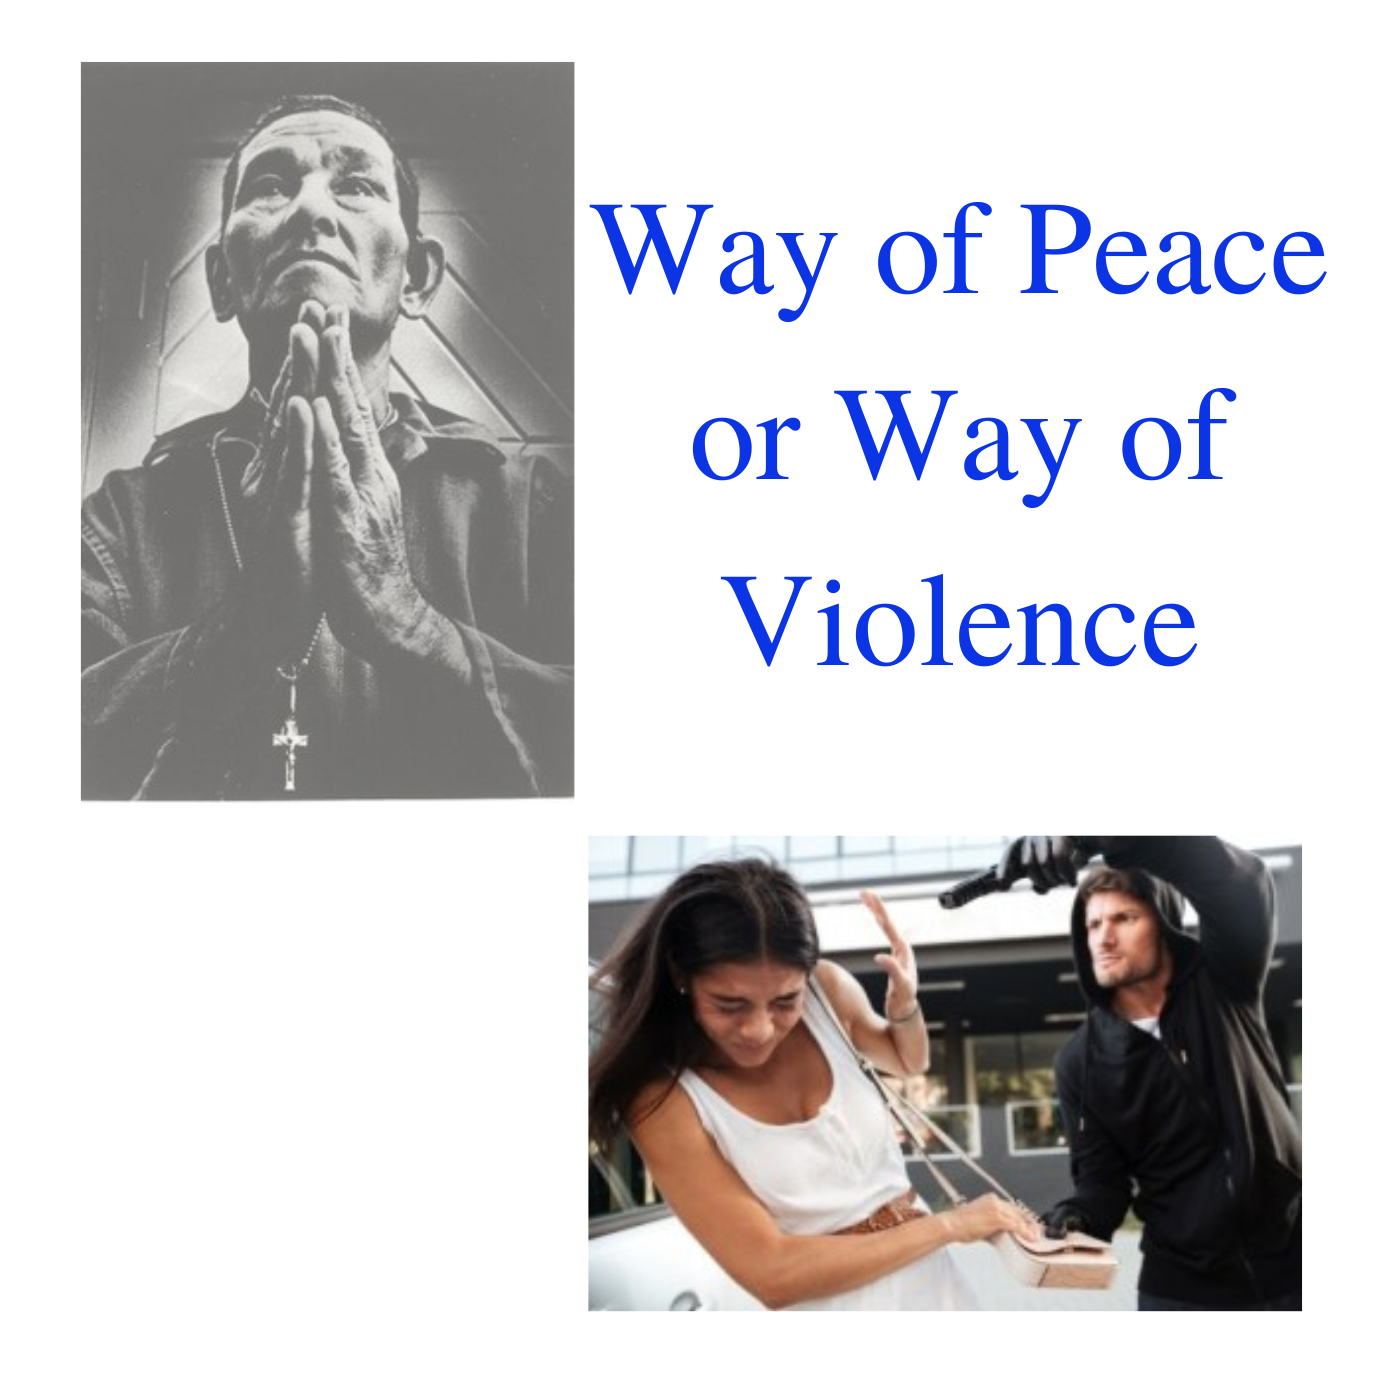 Way of Peace or Way of Violence